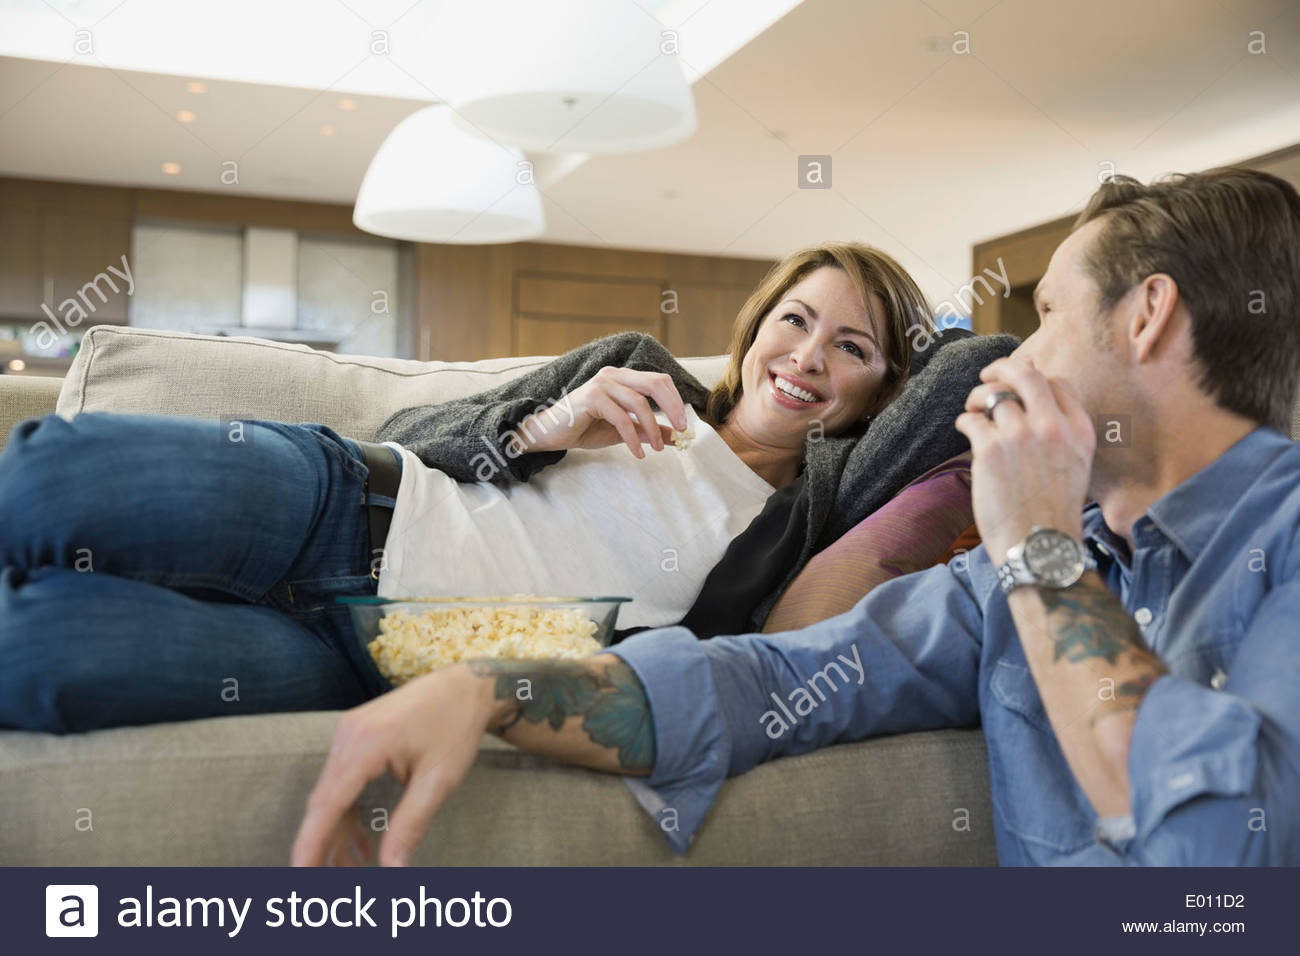 Couple eating popcorn and watching TV Stock Photo